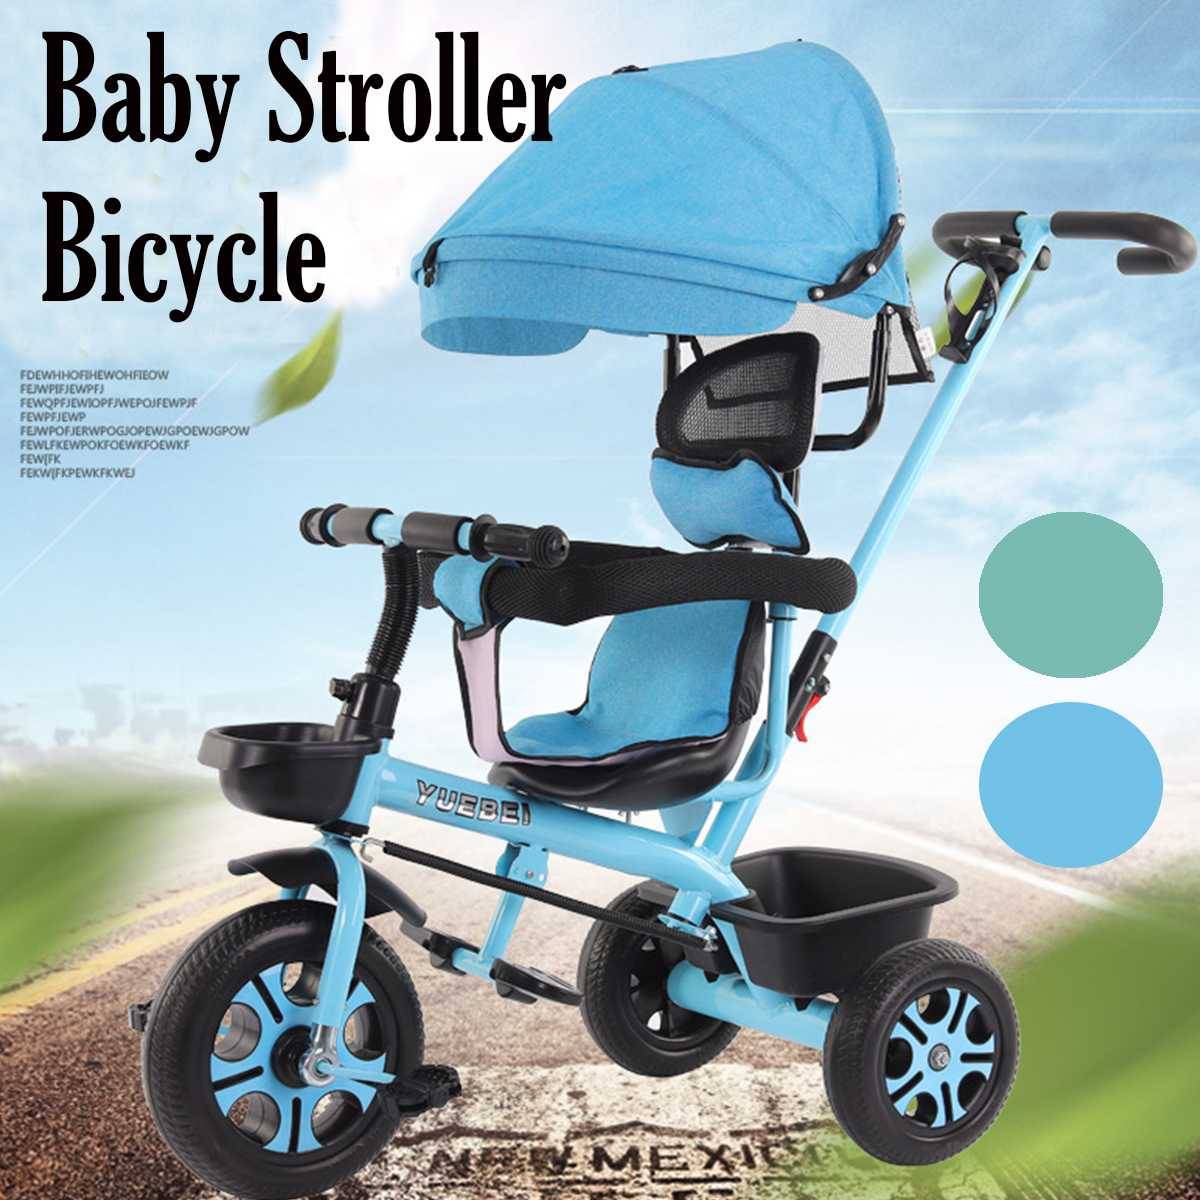 Pubota 5-in-1 Baby Tricycle Kids Stroller Tricycles Foldable 3 Wheel Baby Ride-On Push Toddler Steel Trike for 10 Month-3 Years Old Kids Blue